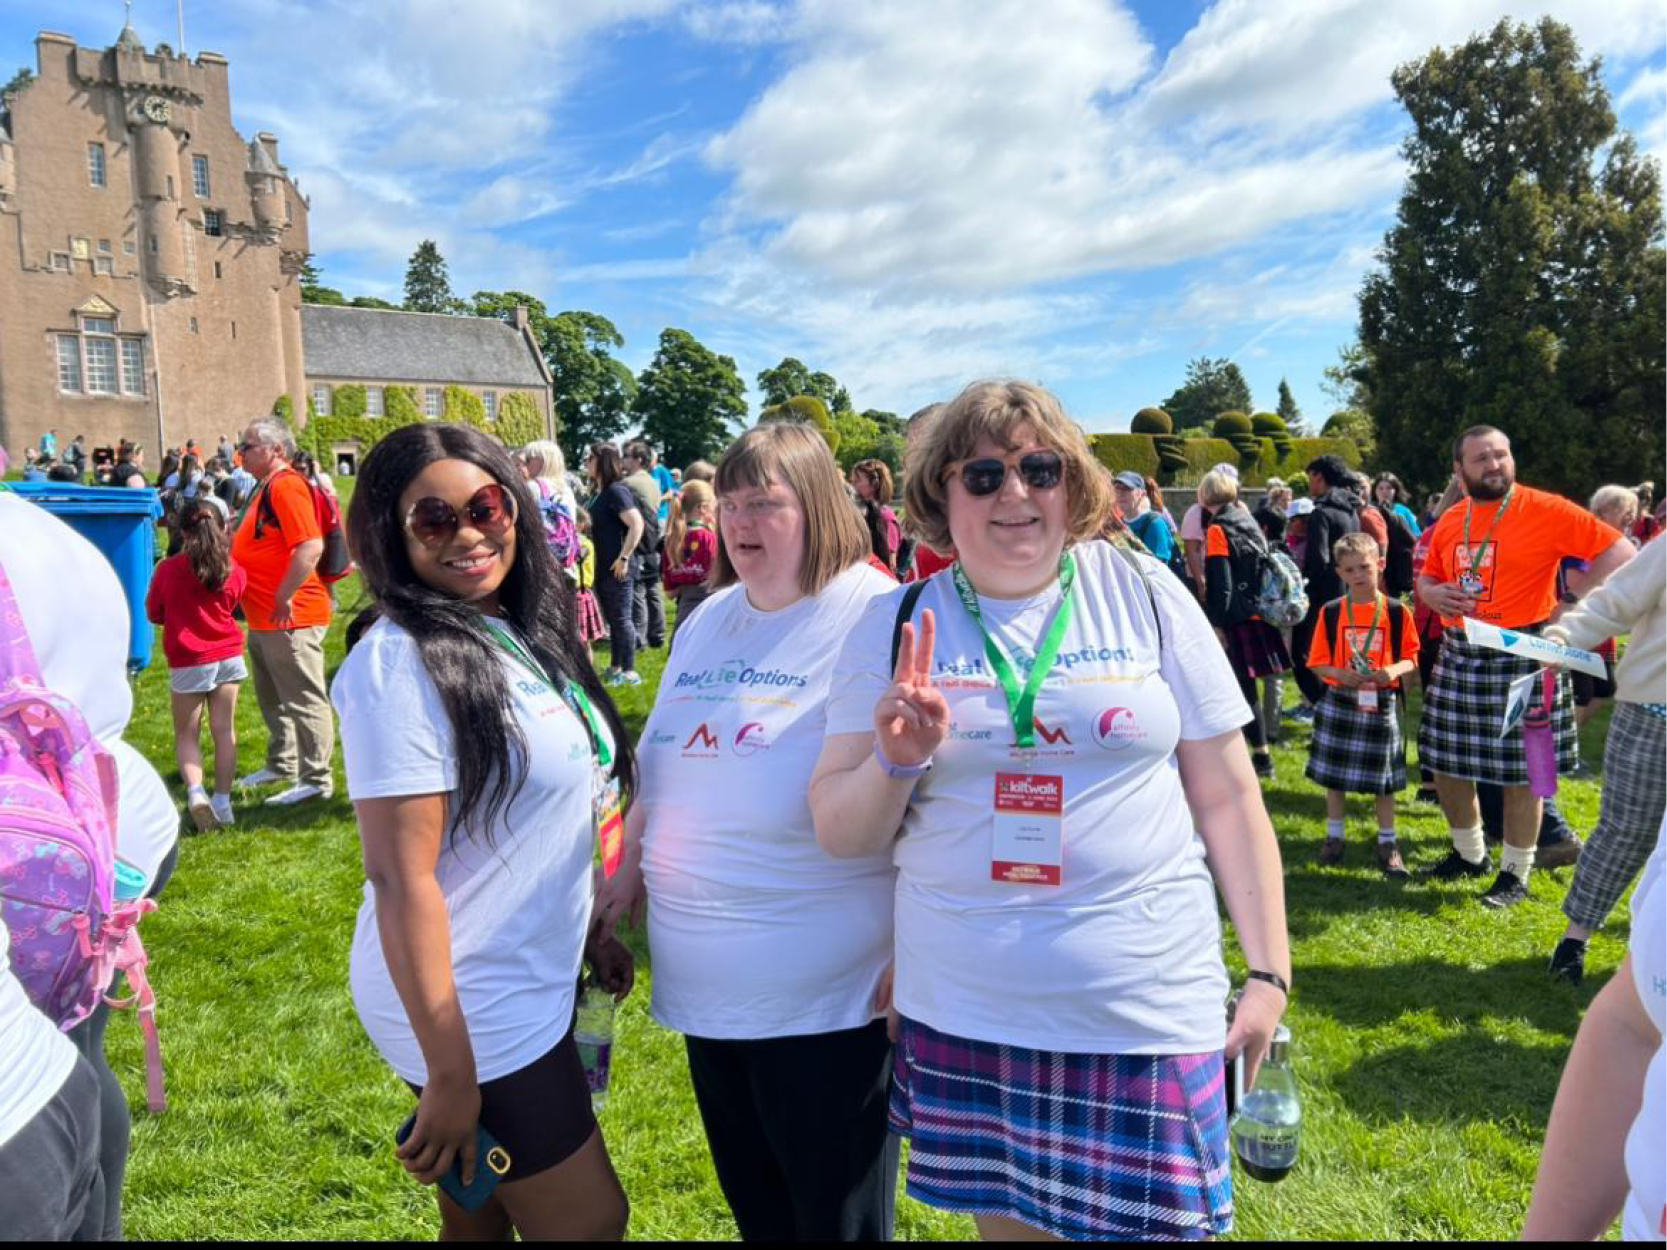 Aberdeen Kiltwalk to Raise Funds for our Inverurie Service